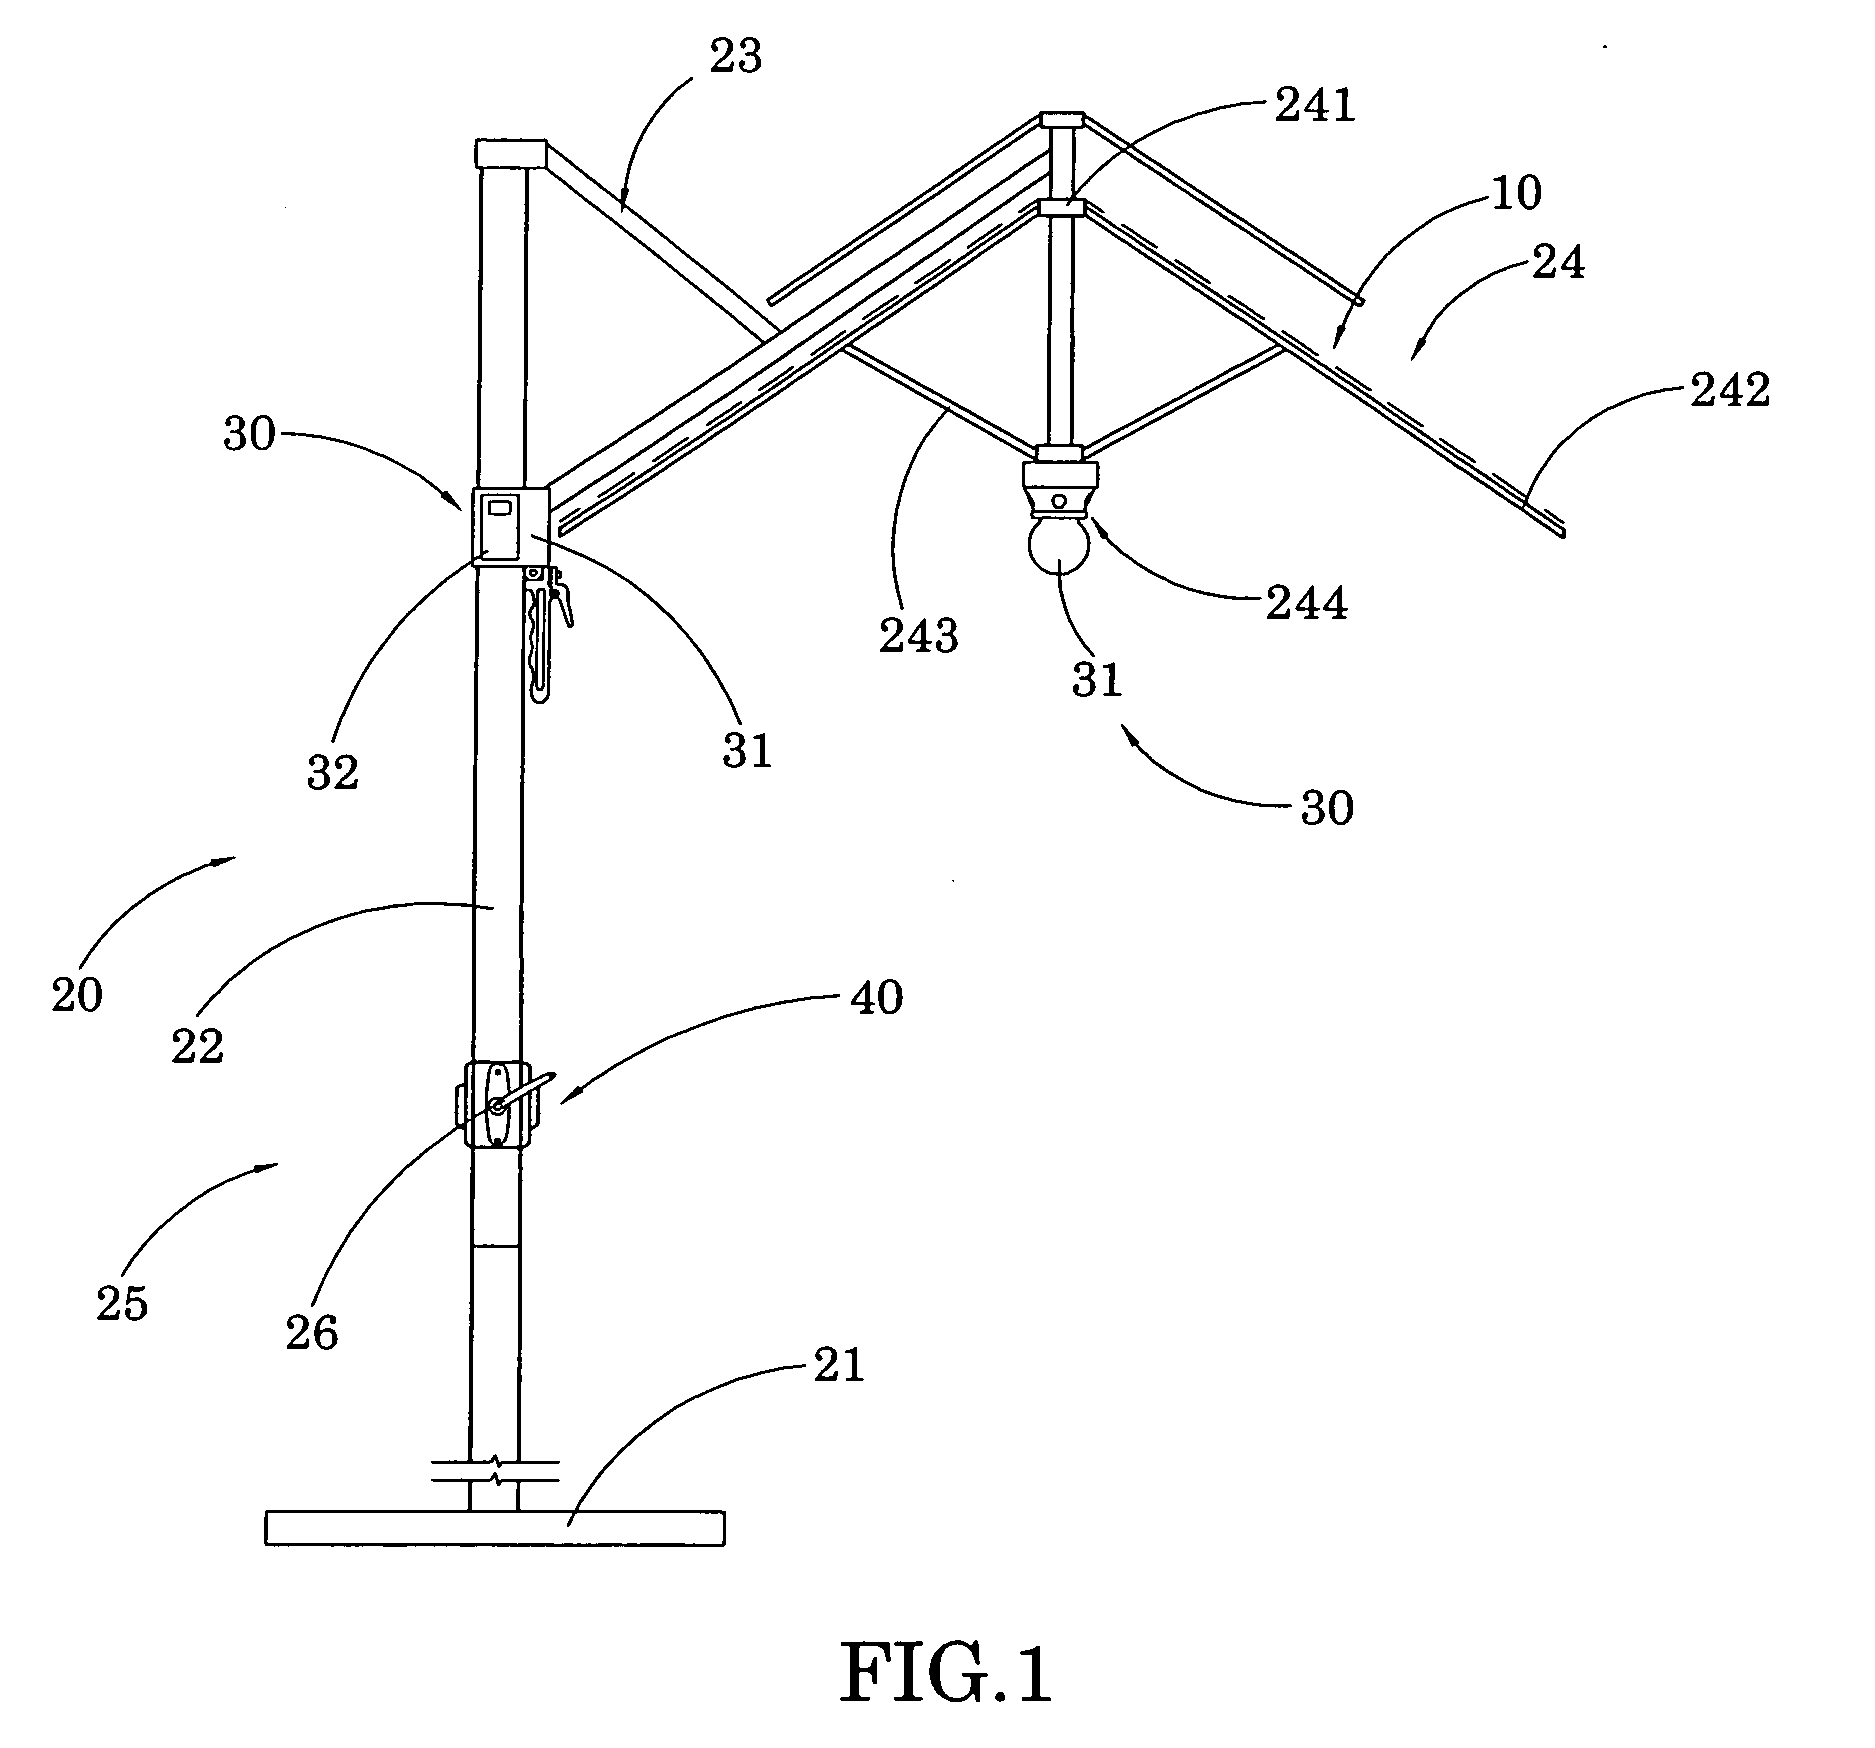 Electrical arrangement of shading device